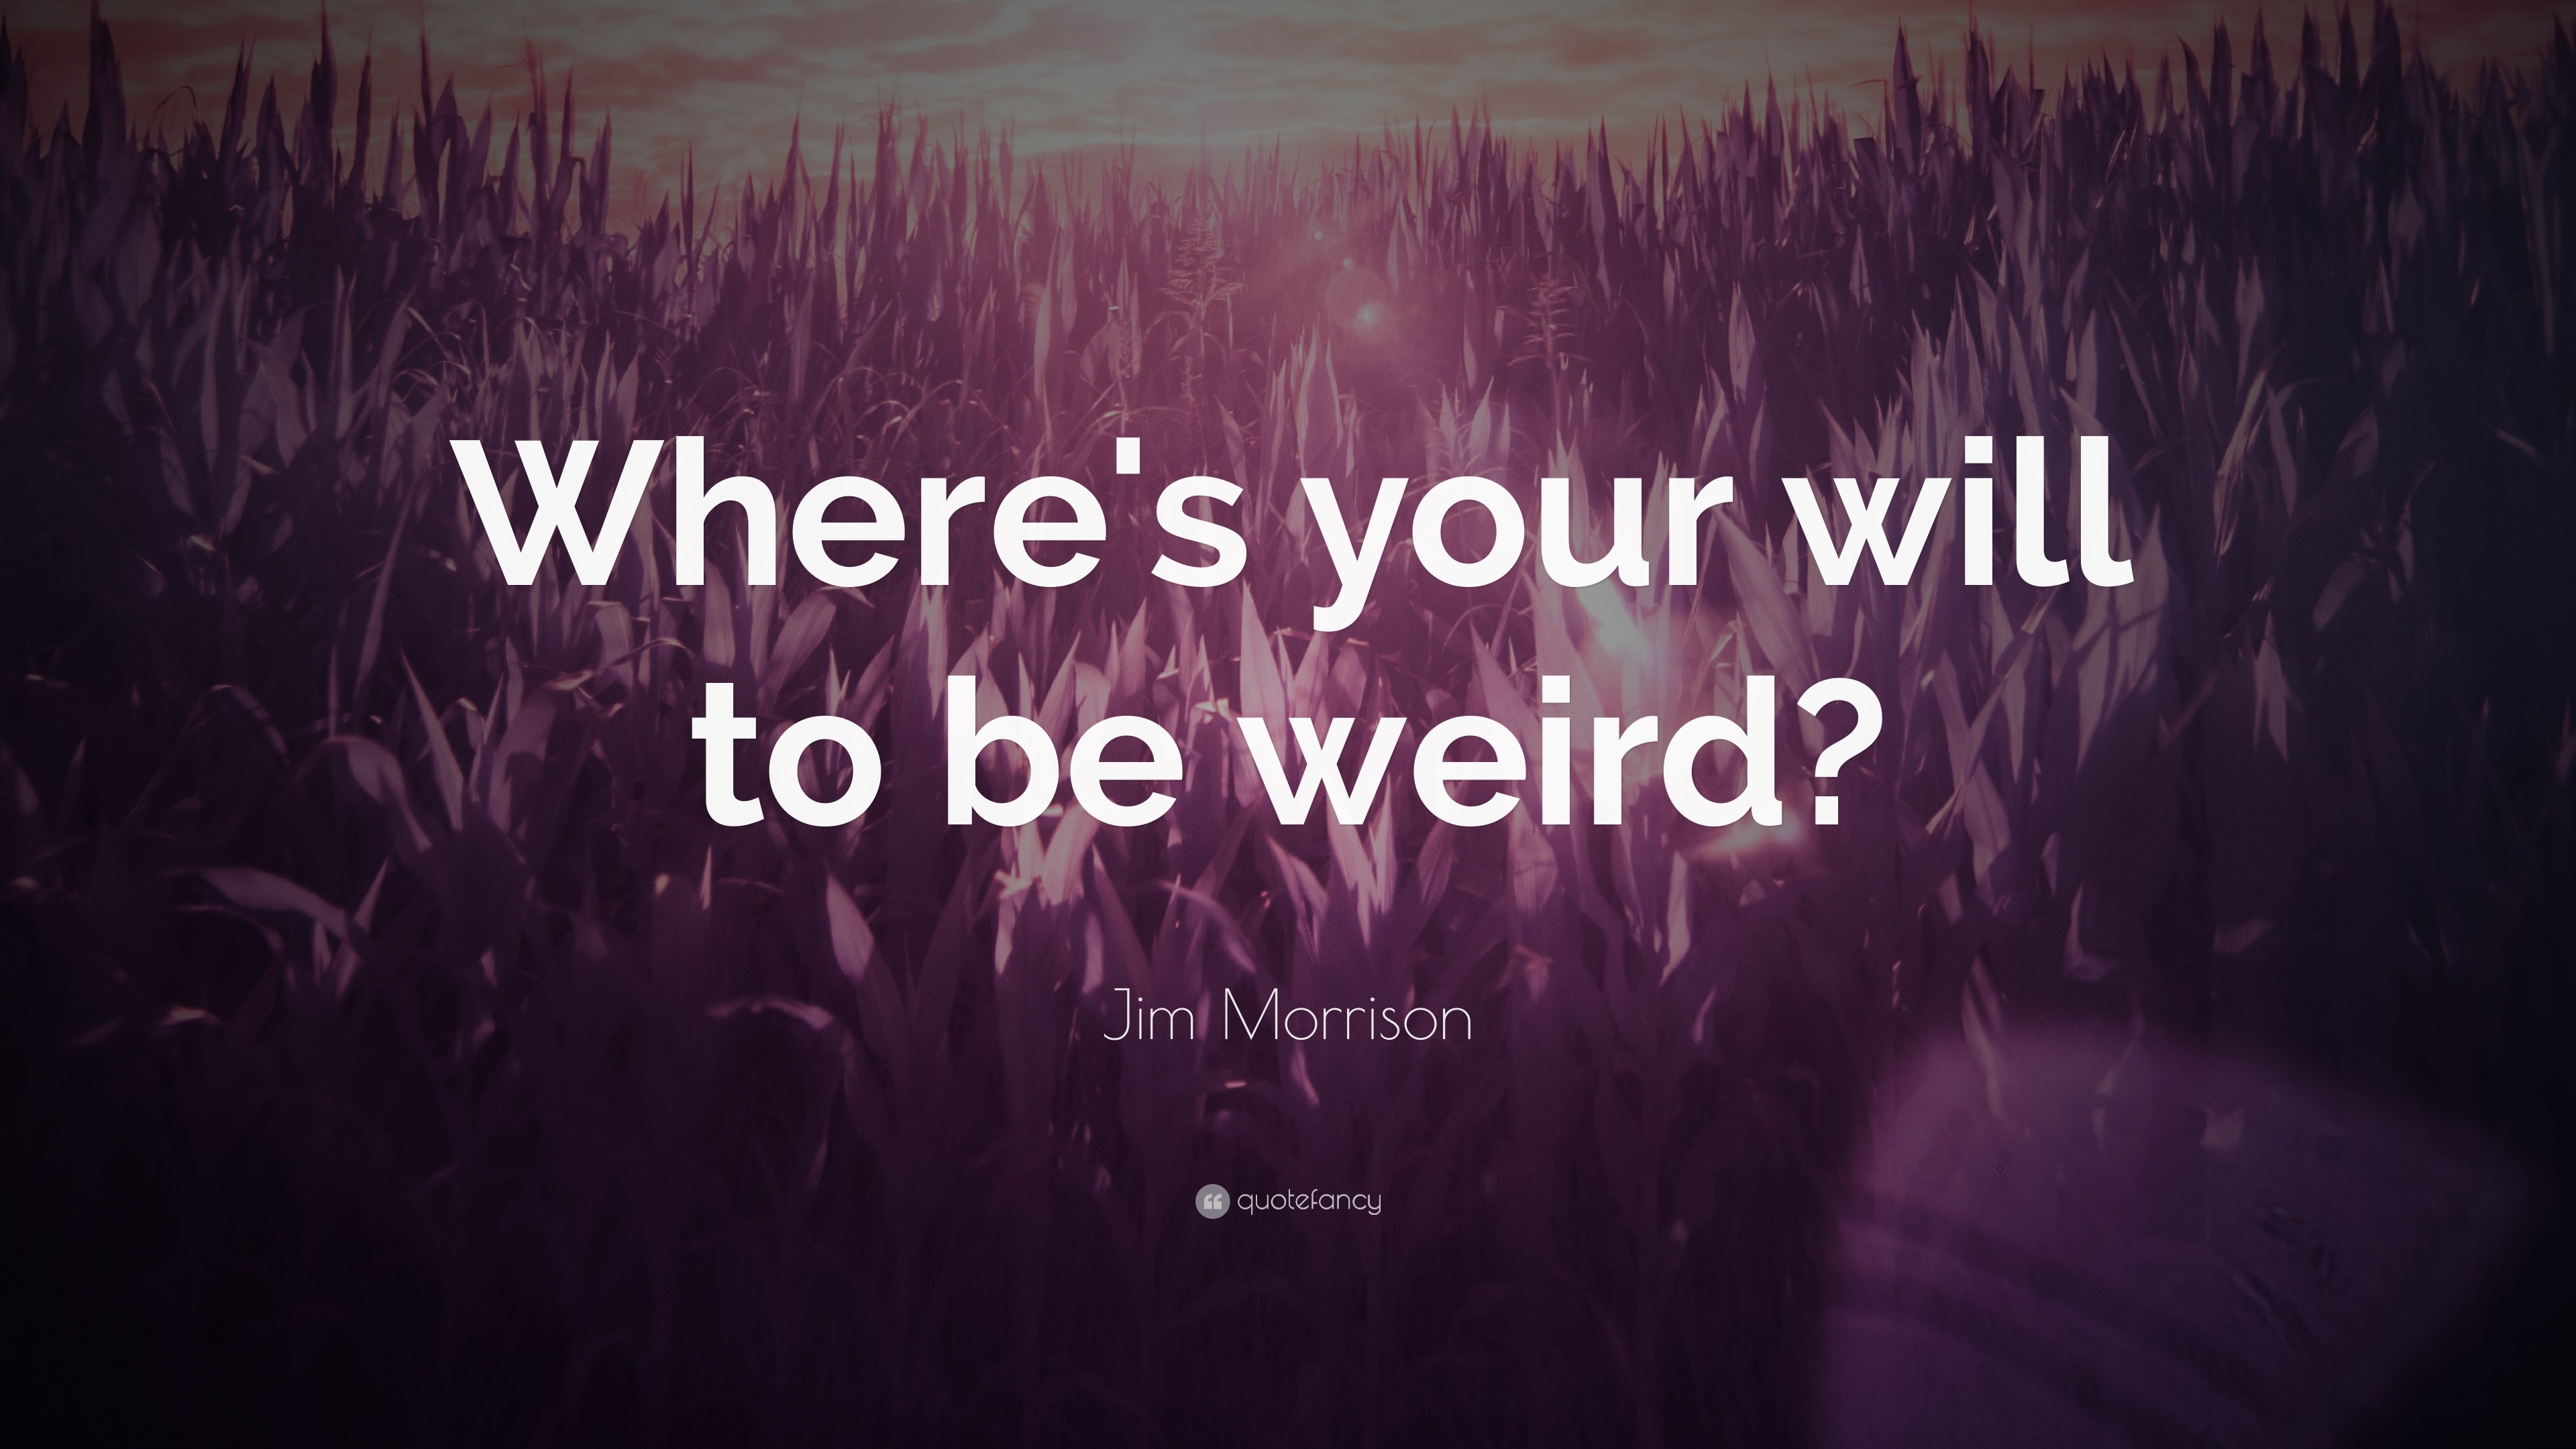 3840x2160 Jim Morrison Quote: “Where's your will to be weird?”